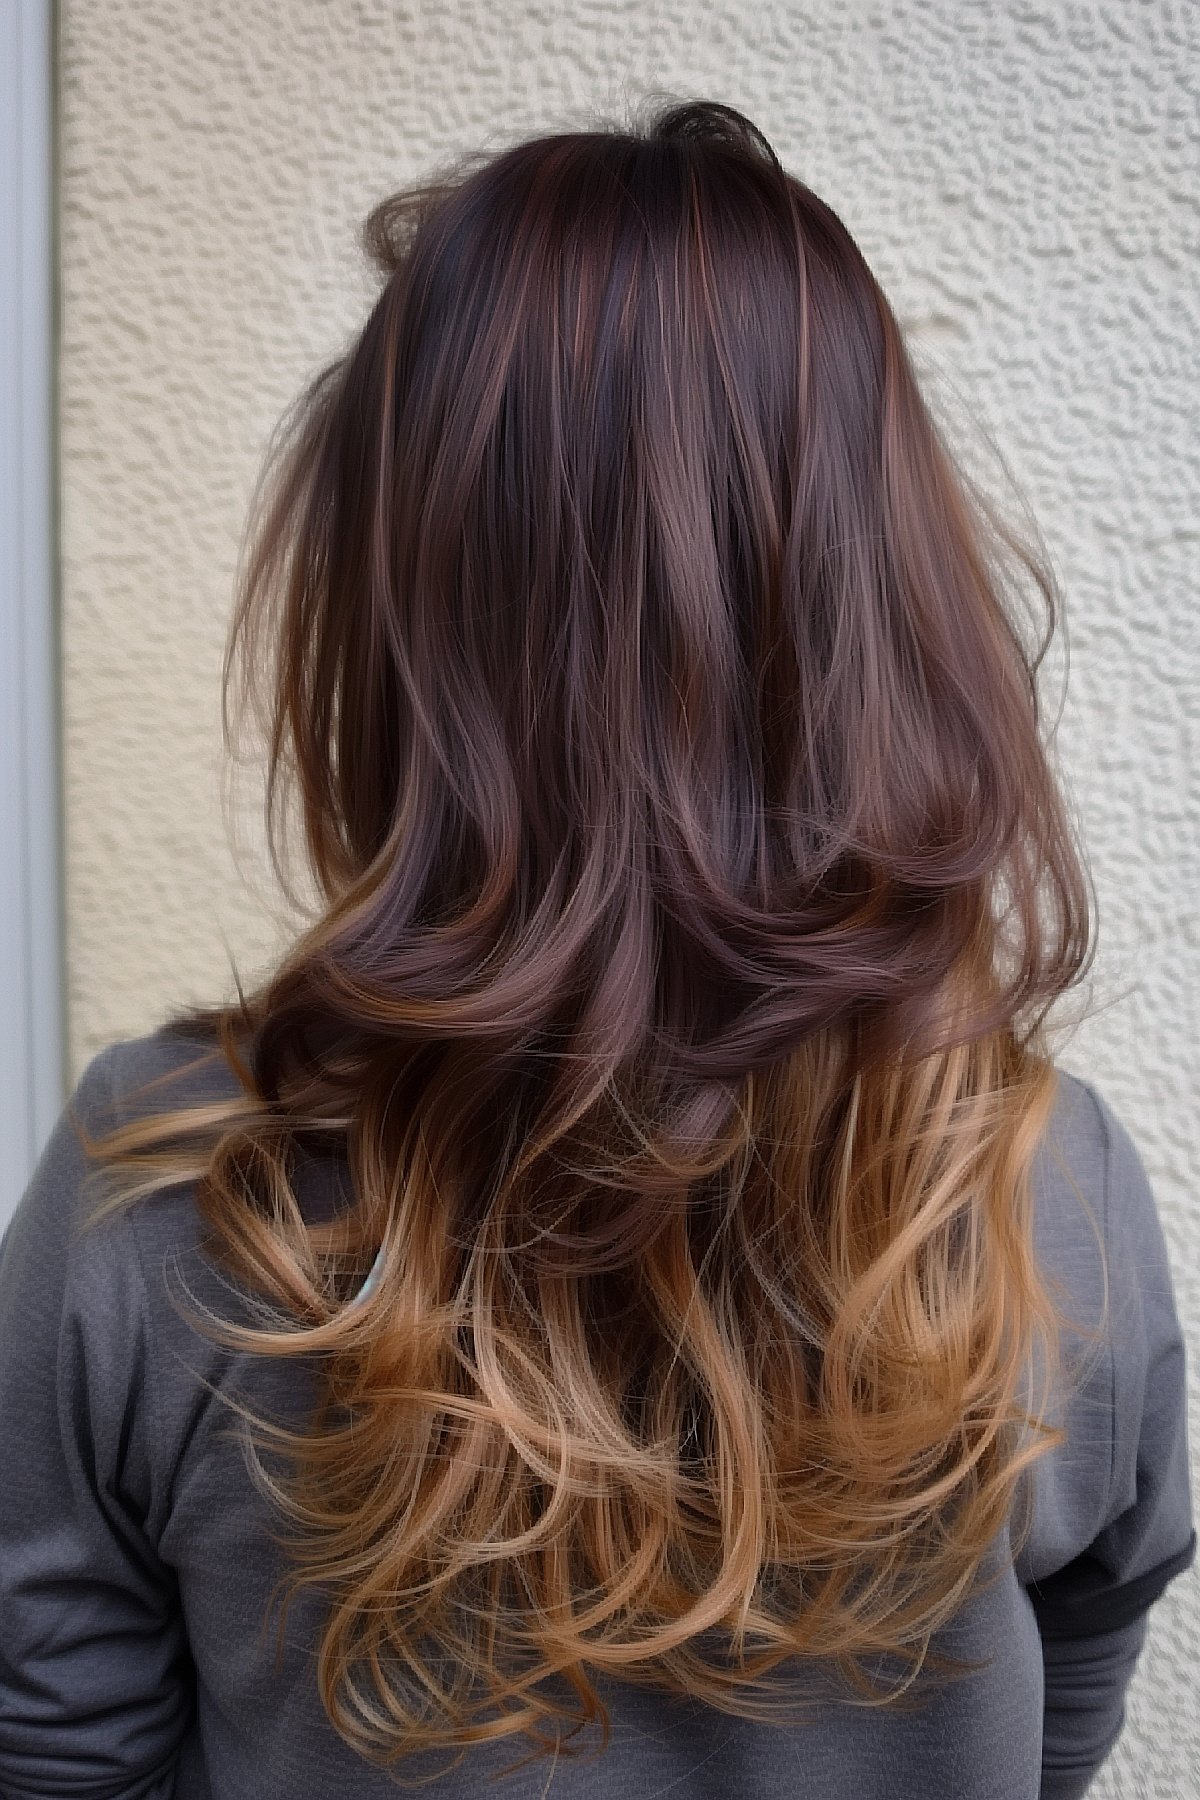 Warm-toned reverse ombre from burgundy to caramel on medium-length hair